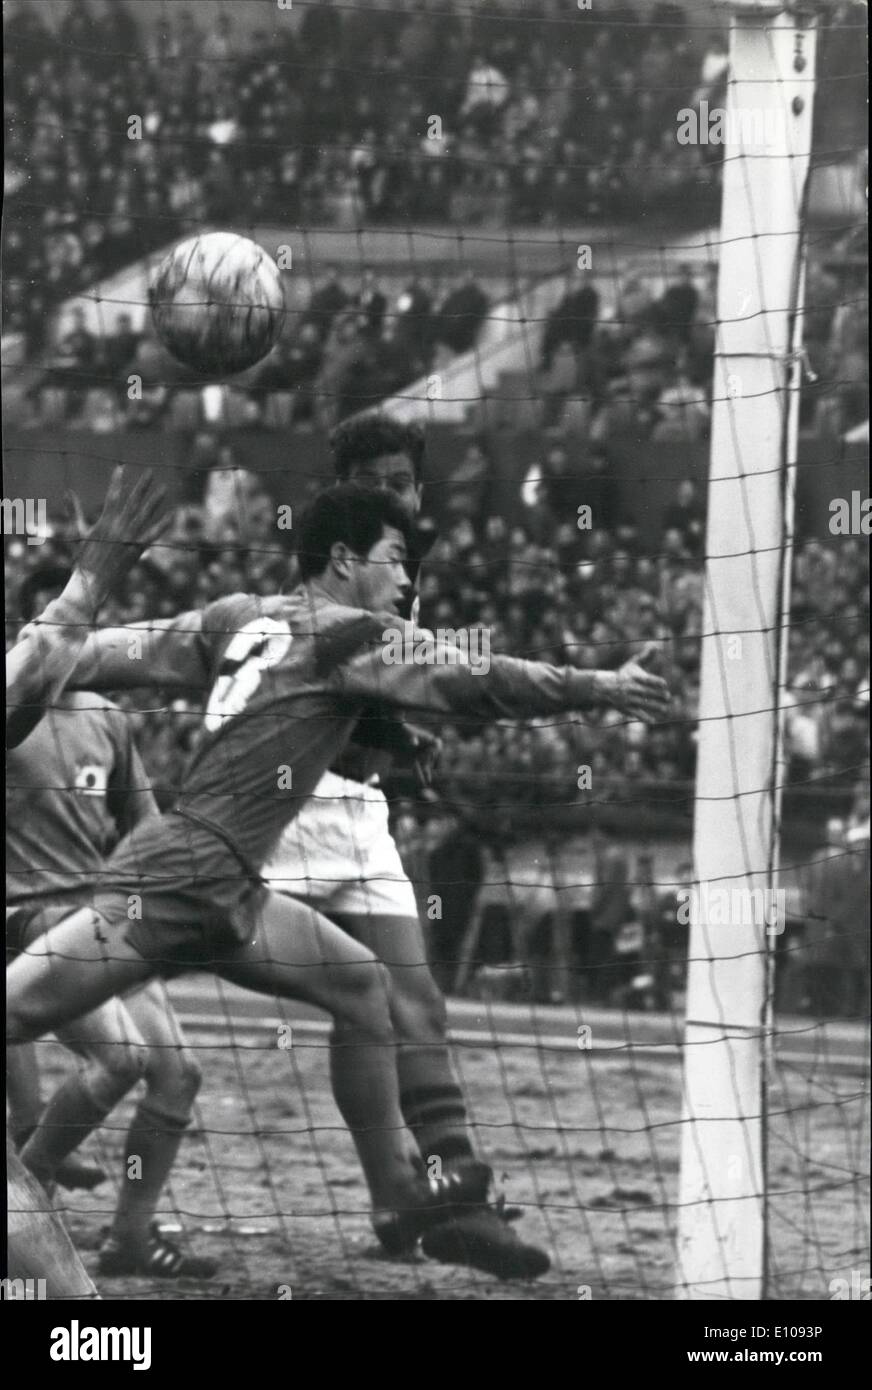 Mar. 03, 1970 - They shall not pass: A Japanese full-back makes desperate efforts to protect his goal and goalkeeper from an attack by the forwards of the Flamengo Club Brazil, during their match with an all-Japan ''B'' team at the Olympic Stadium in Tokyo. The result of the match was a 3-3 draw. Stock Photo